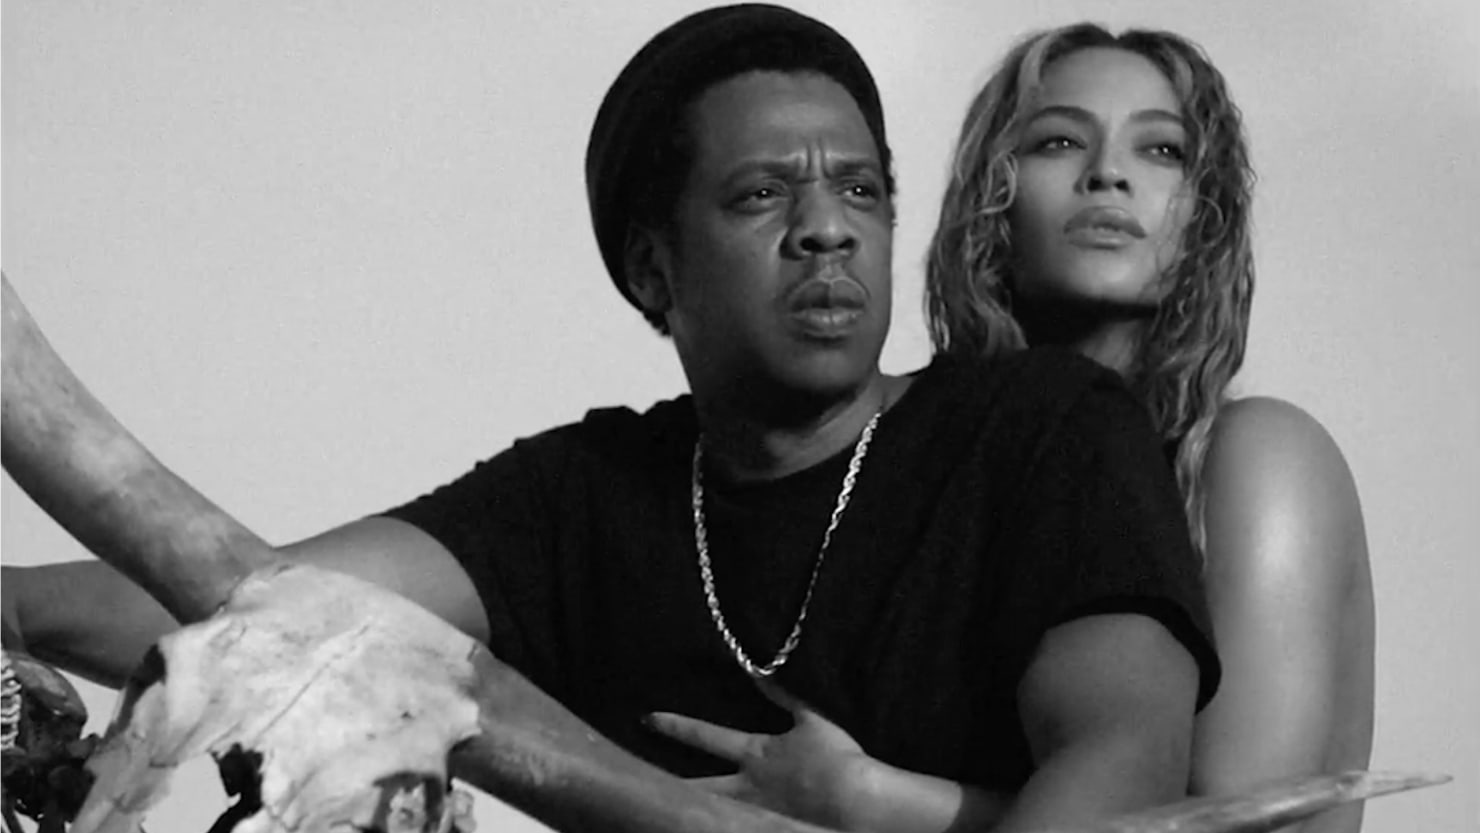 Beyoncé and Jay-Z Make 2018 ‘On the Run II’ World Tour Official - Beyonce Ft Jay Z Part 2